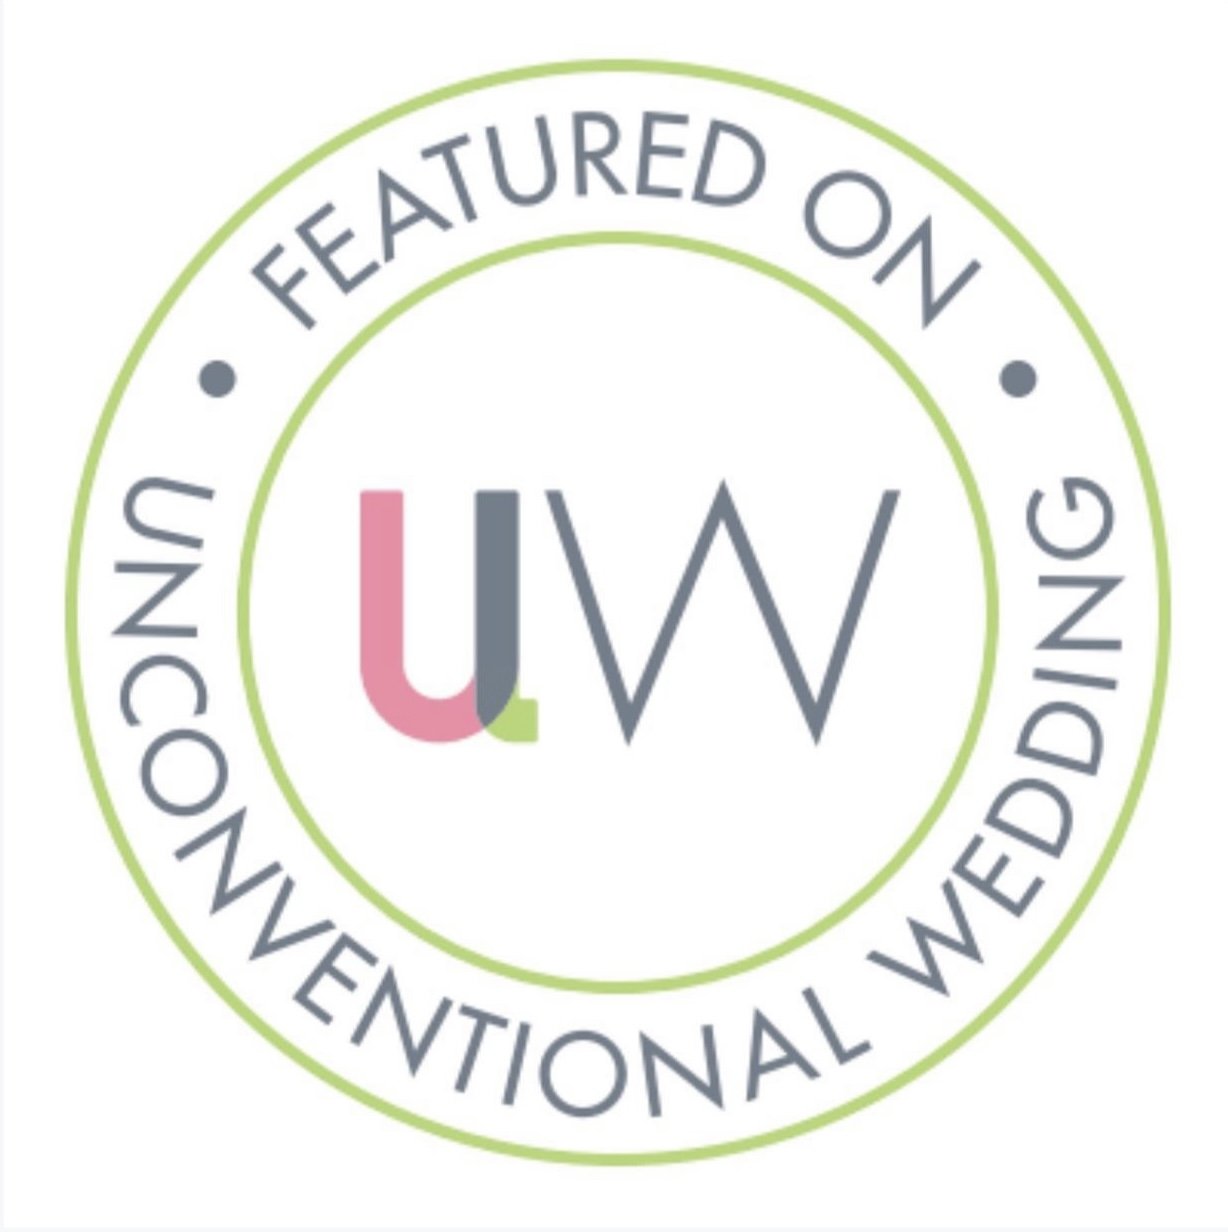 Featured in Unconventional Weddings!